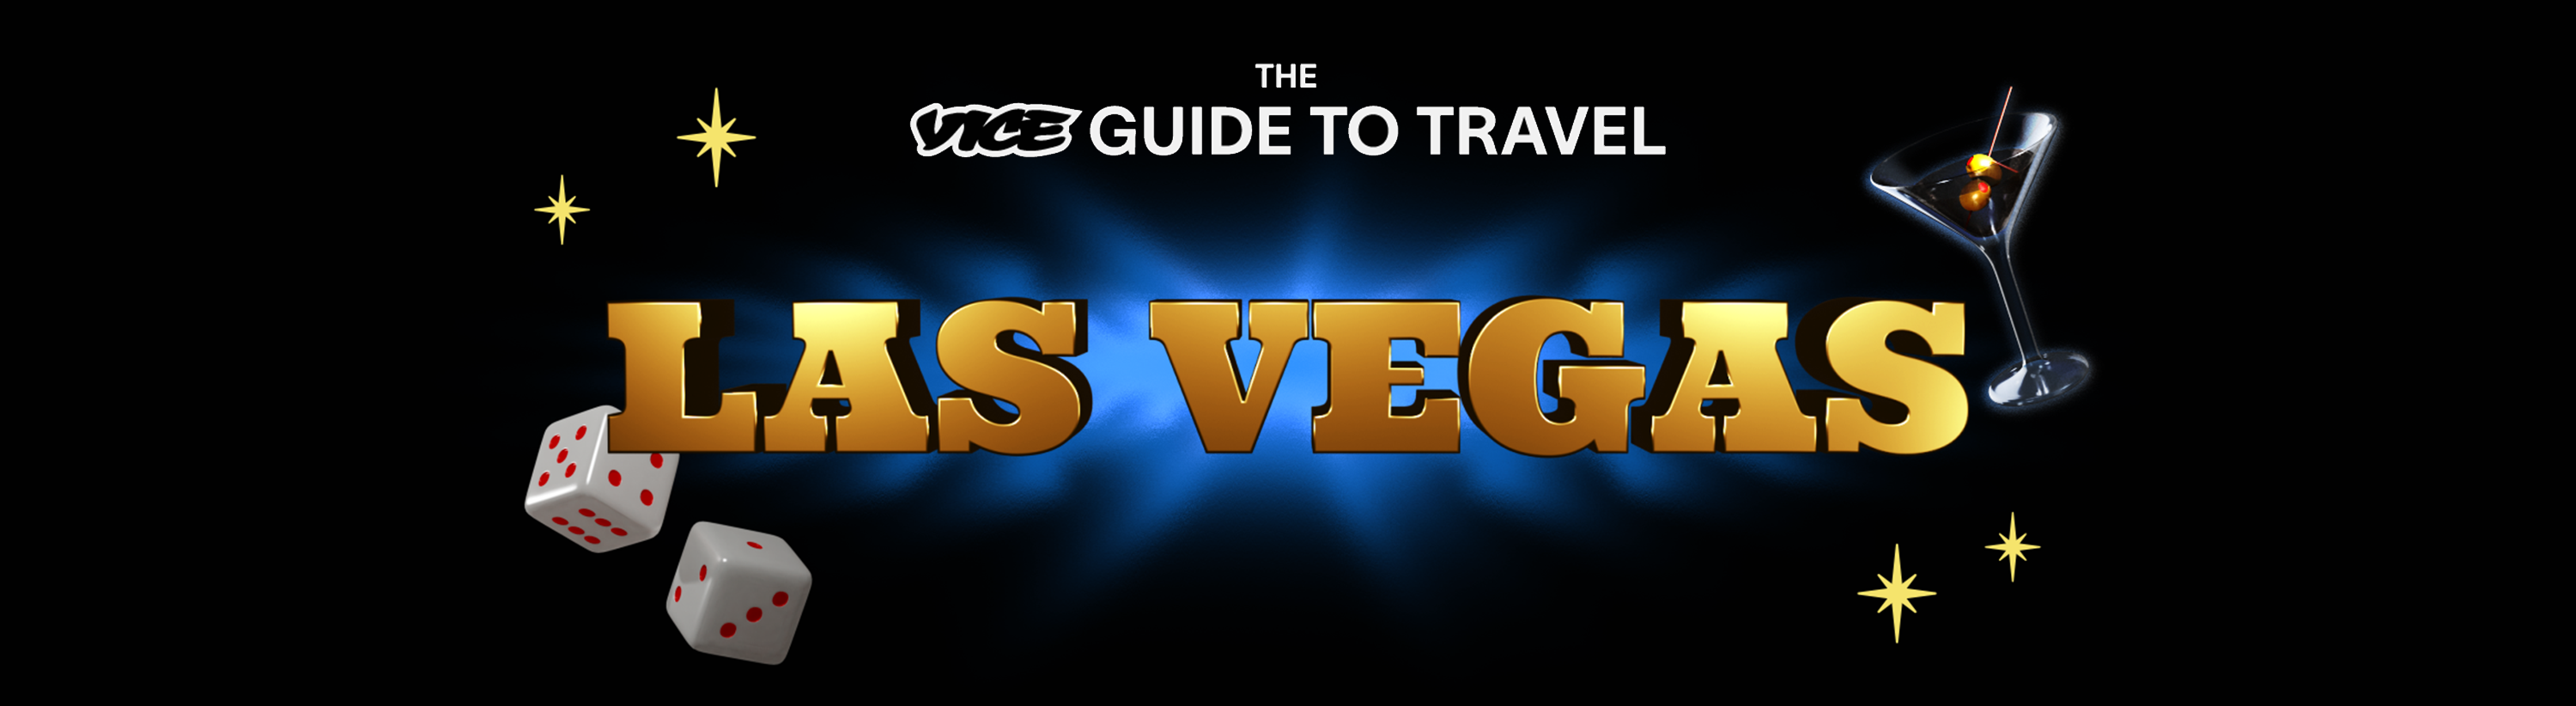 The VICE Guide to Travel Las Vegas